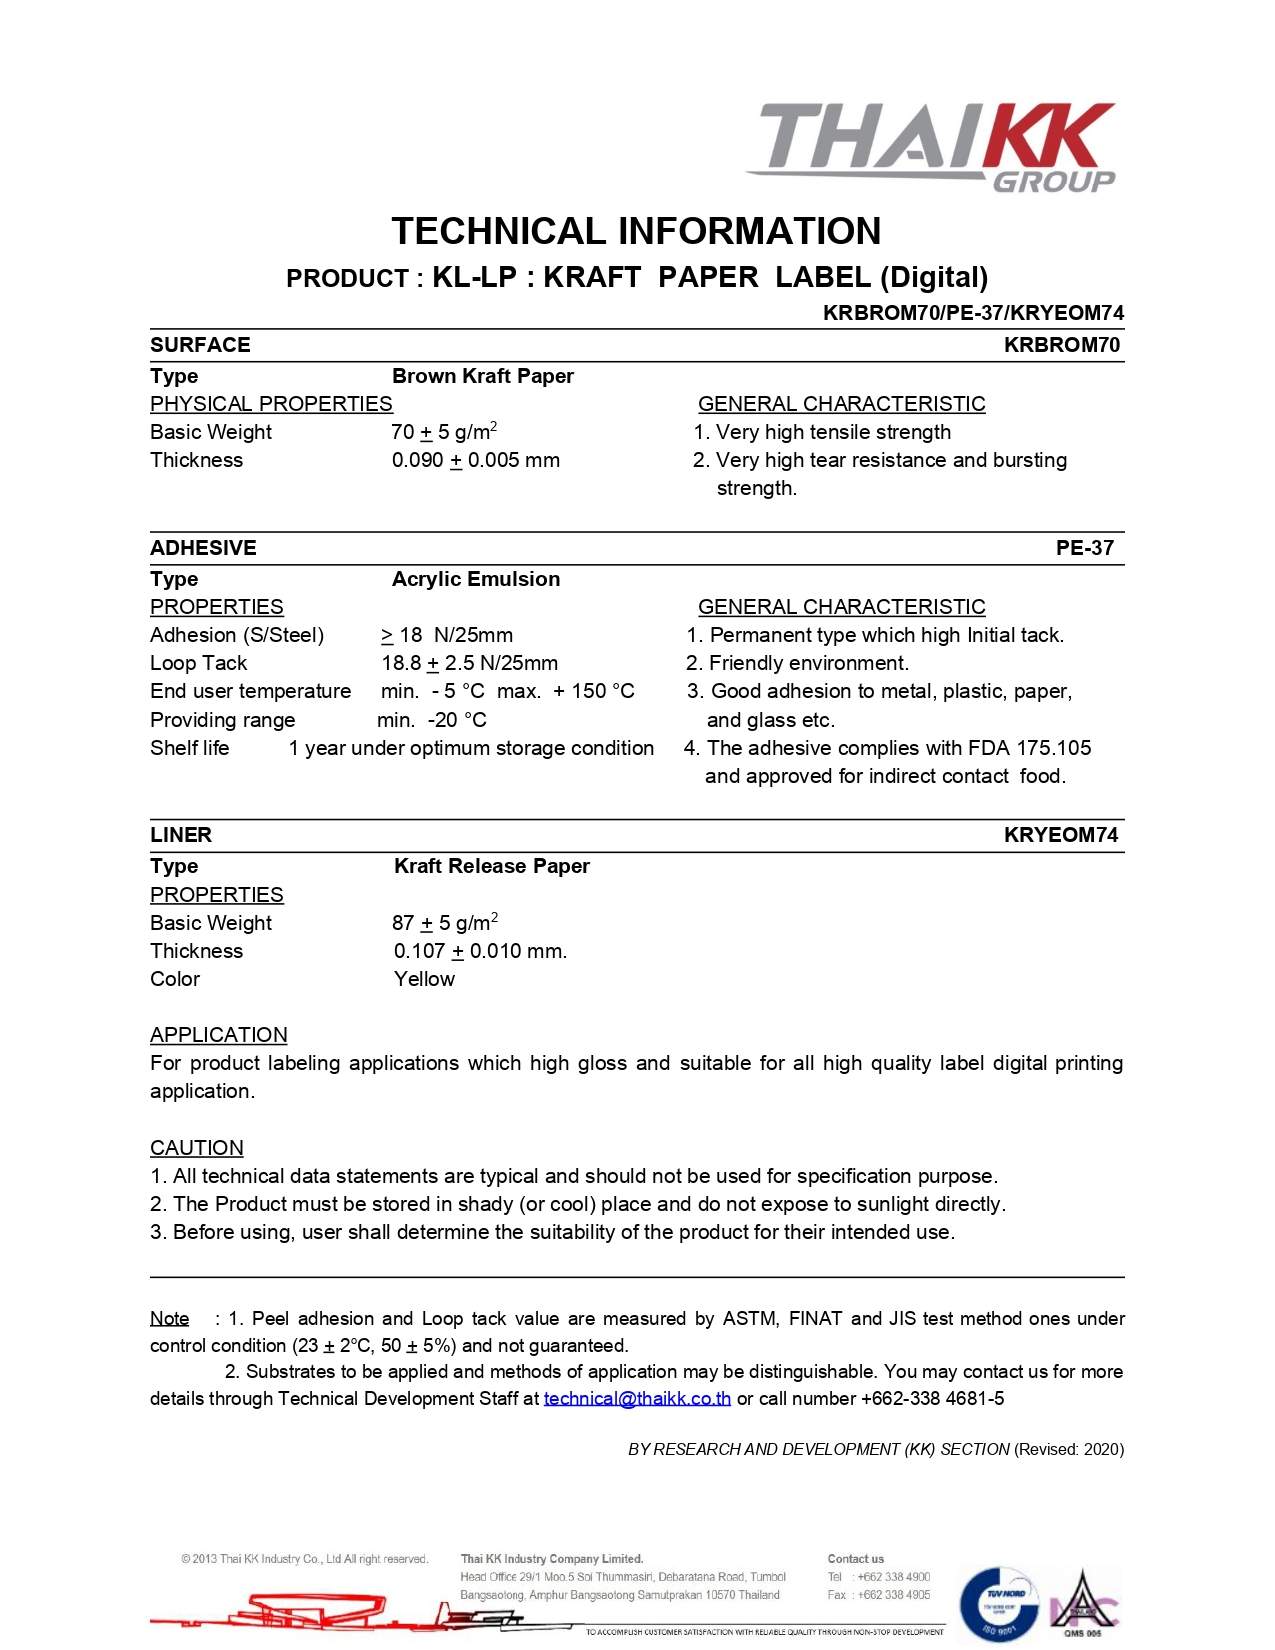 Technical Specification